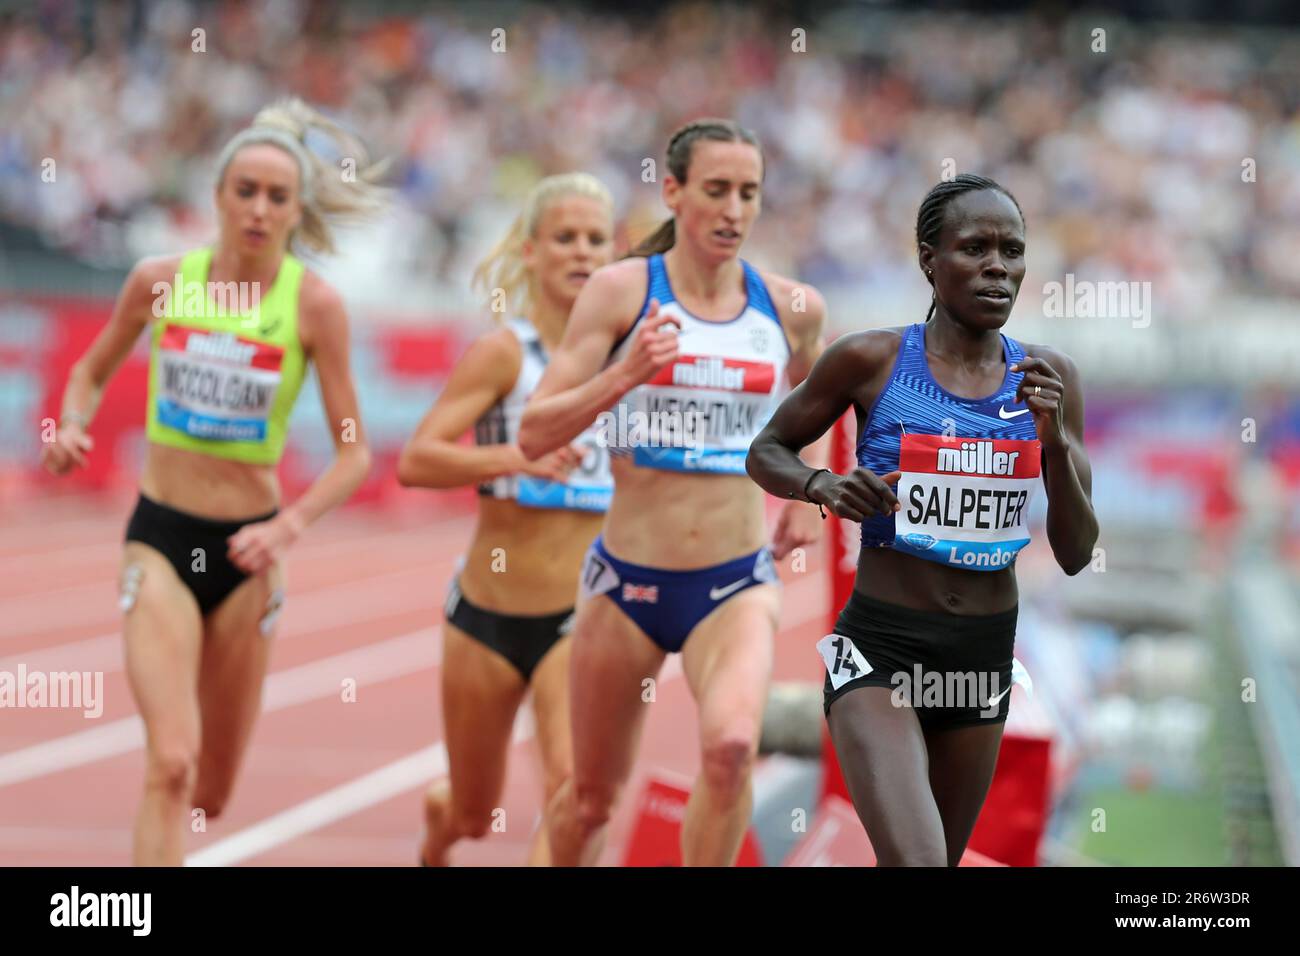 Lonah Chemtai SALPETER (Israel) competing in the Women's 5000m Final at the 2019, IAAF Diamond League, Anniversary Games, Queen Elizabeth Olympic Park, Stratford, London, UK. Stock Photo